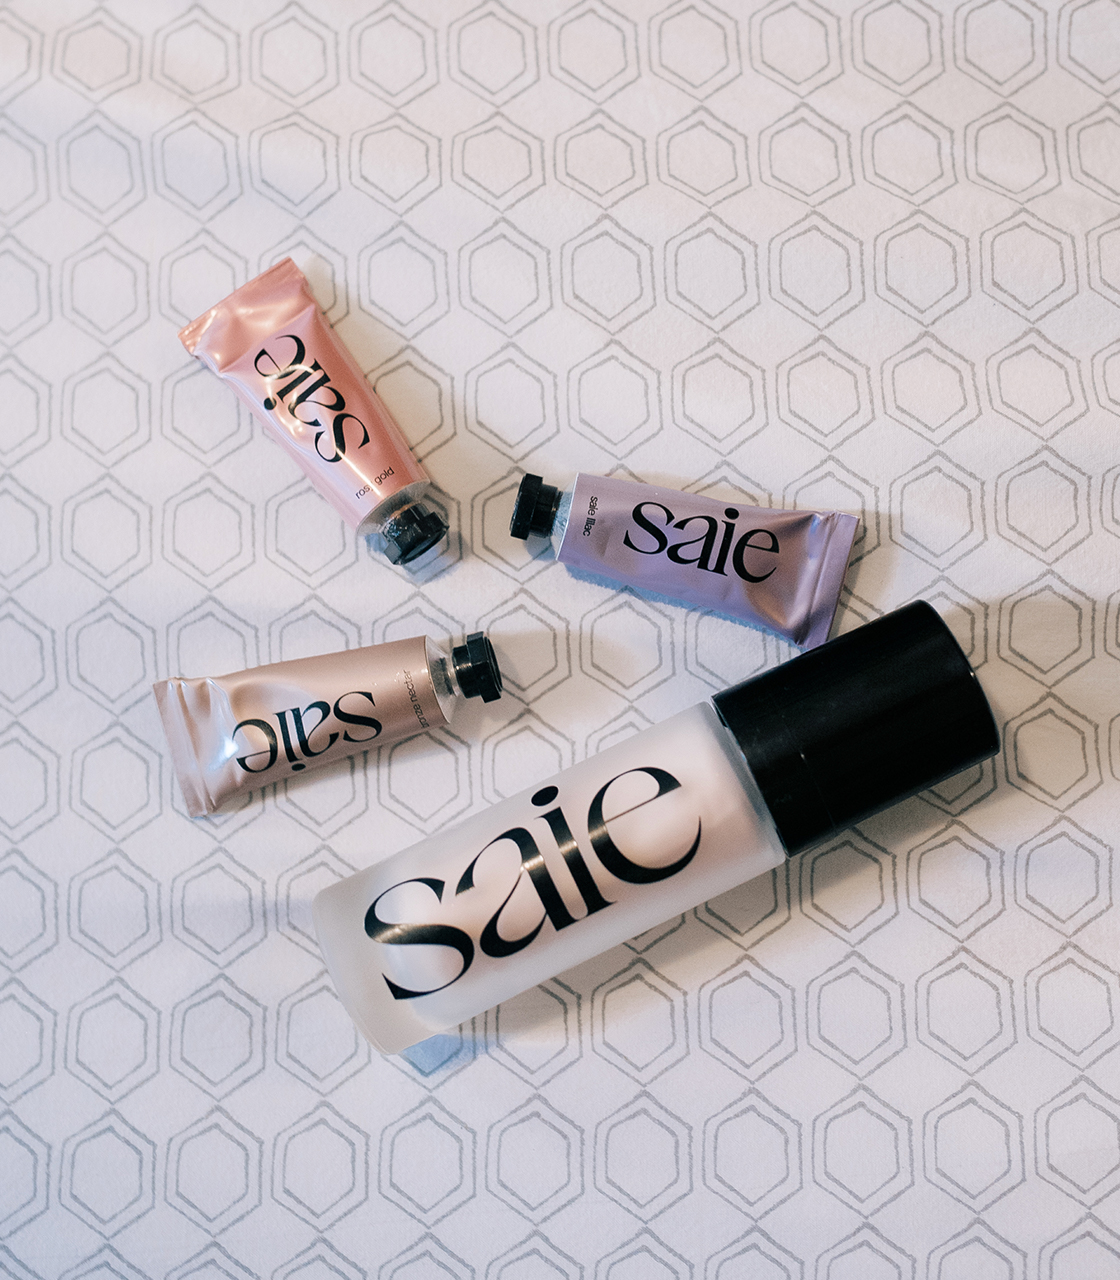 Saie's new GLOW Products